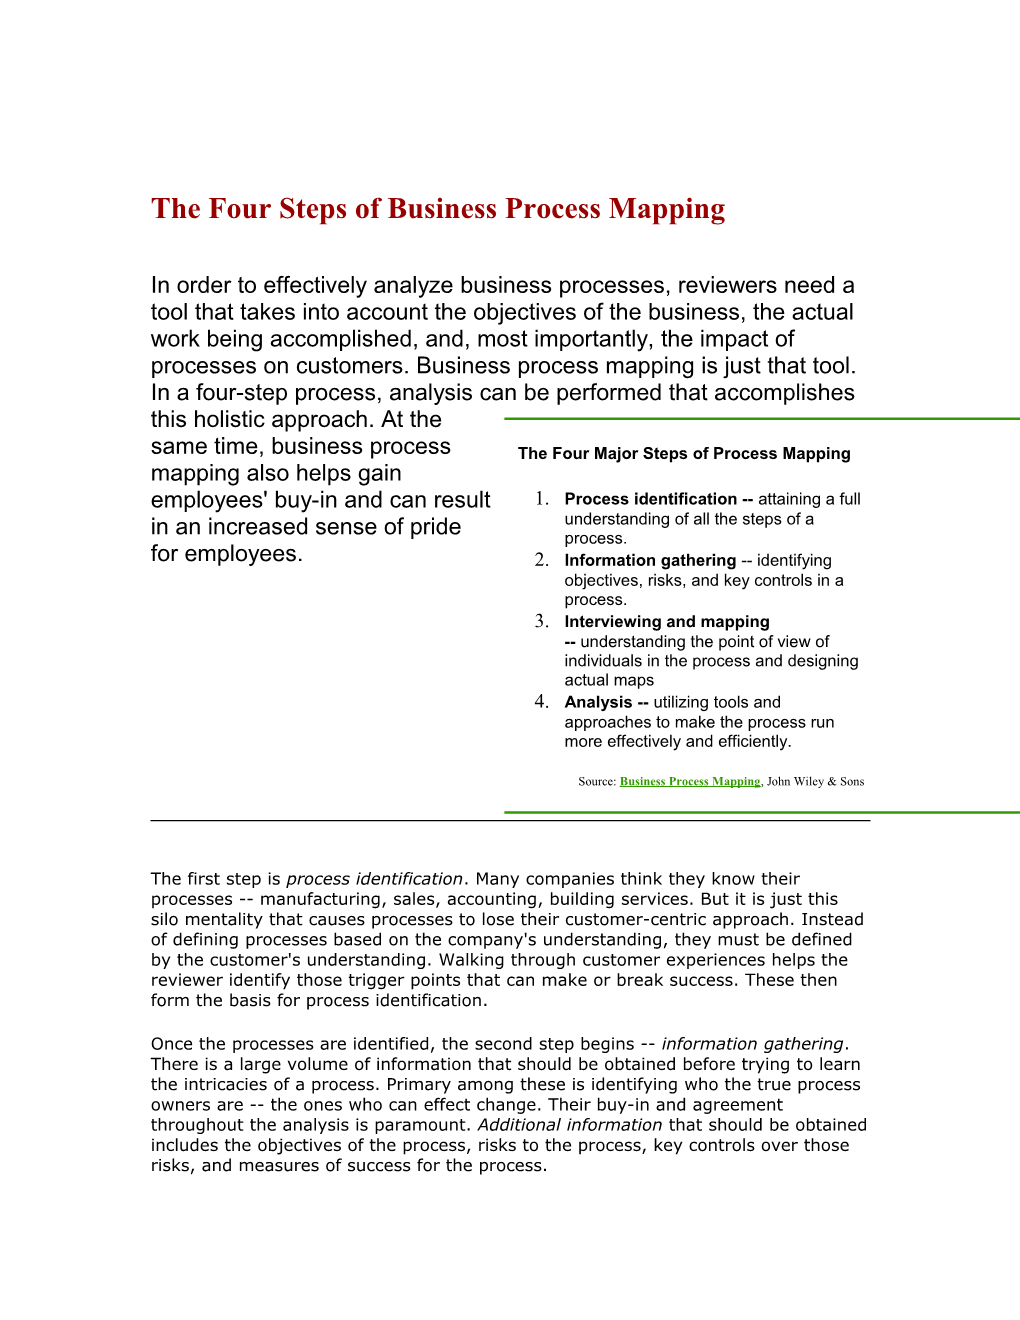 The Four Steps of Business Process Mapping